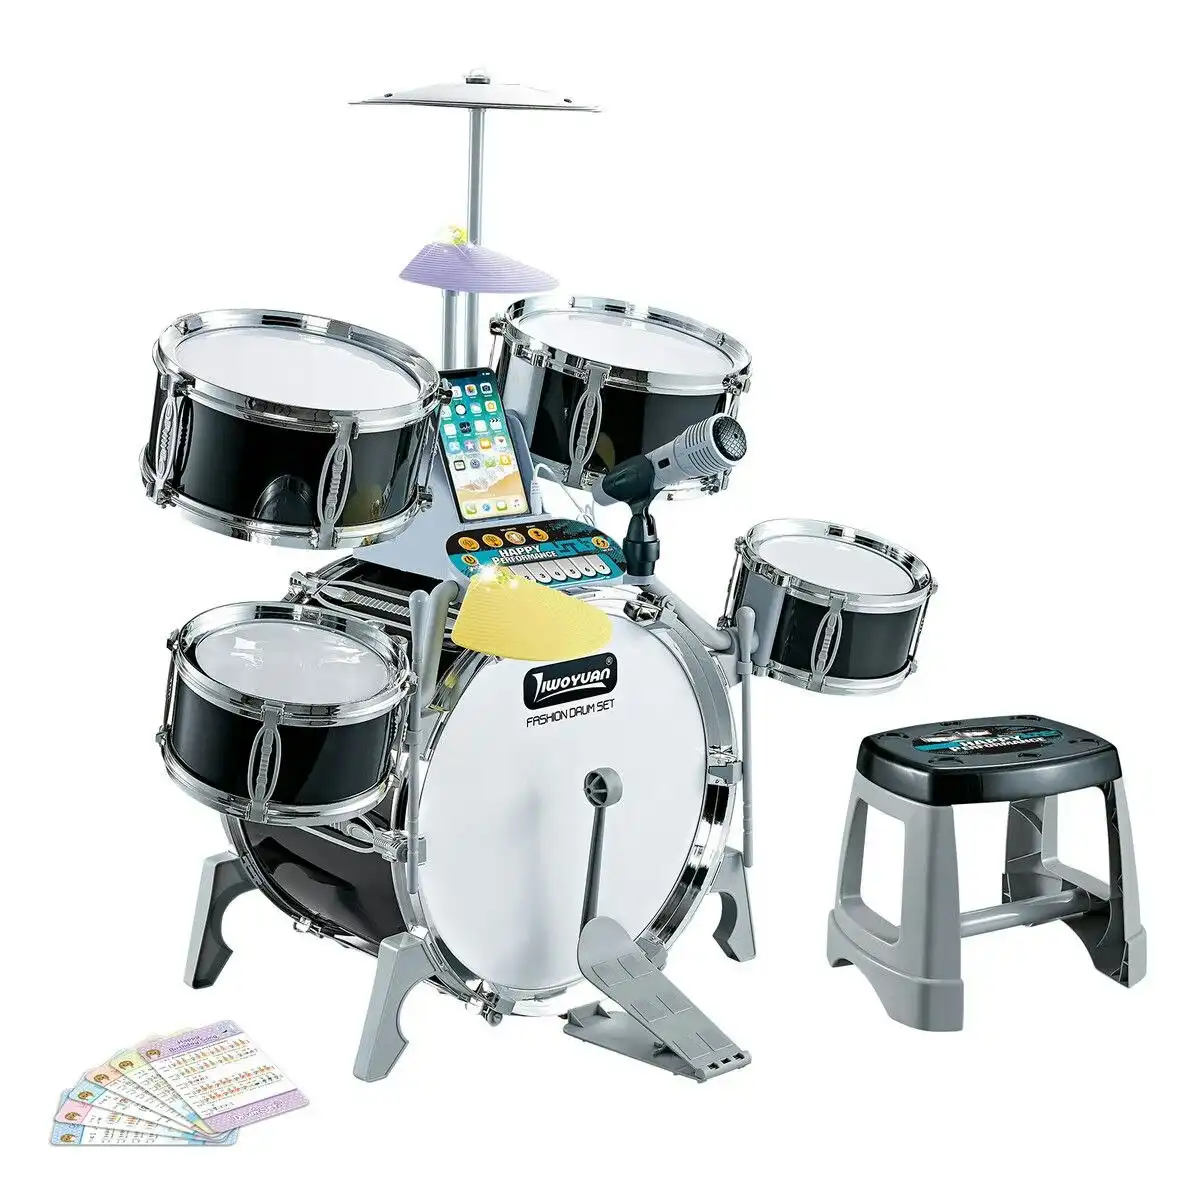 Ausway Kids Jazz Drum Set Junior Musical Educational Instrument Toy Kit Childrens Learning Preschool Playset with Stool Plastic